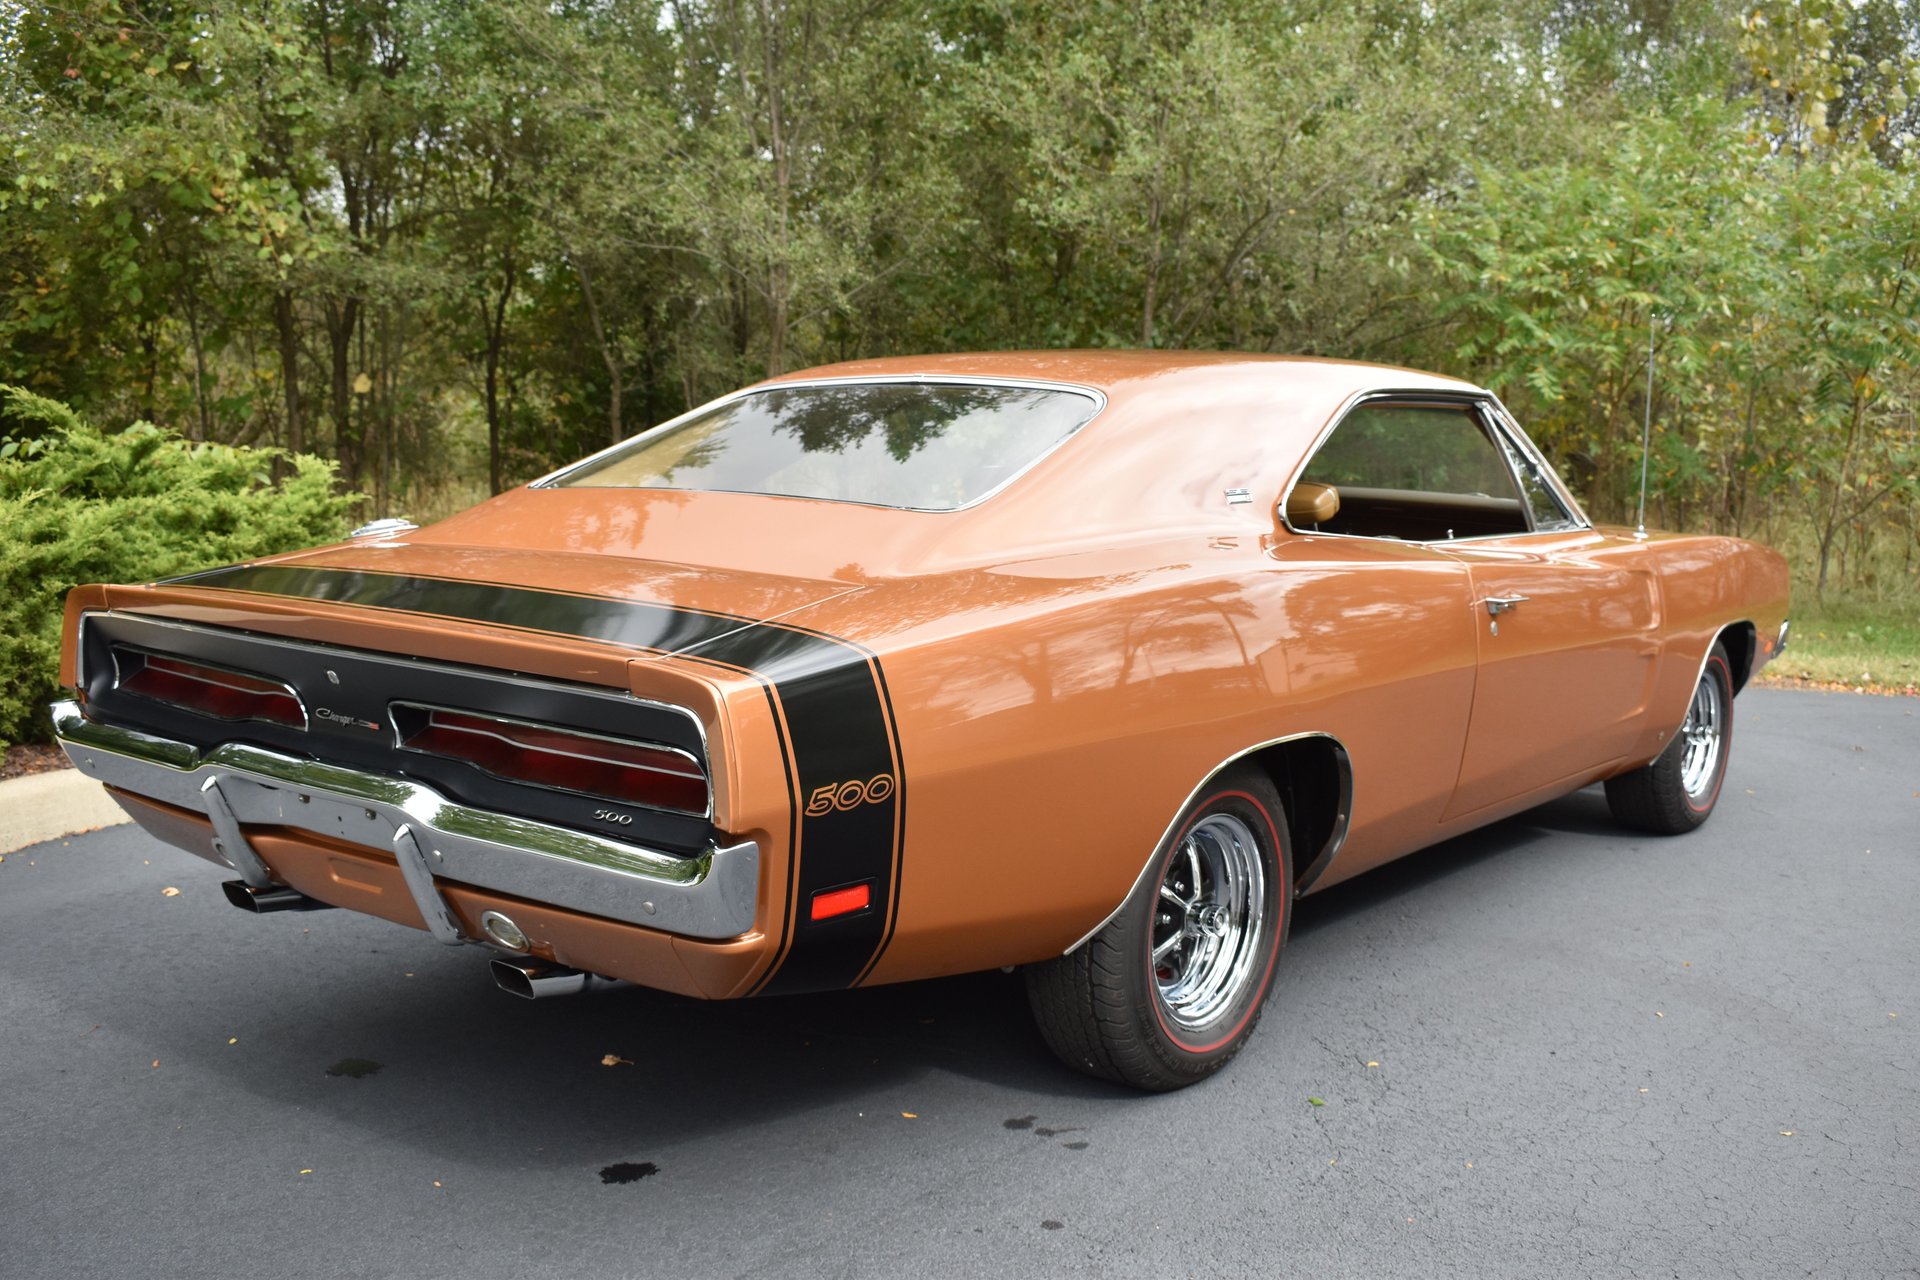 "Rare and Mint 1969 Dodge Charger 500 SE" is back again....